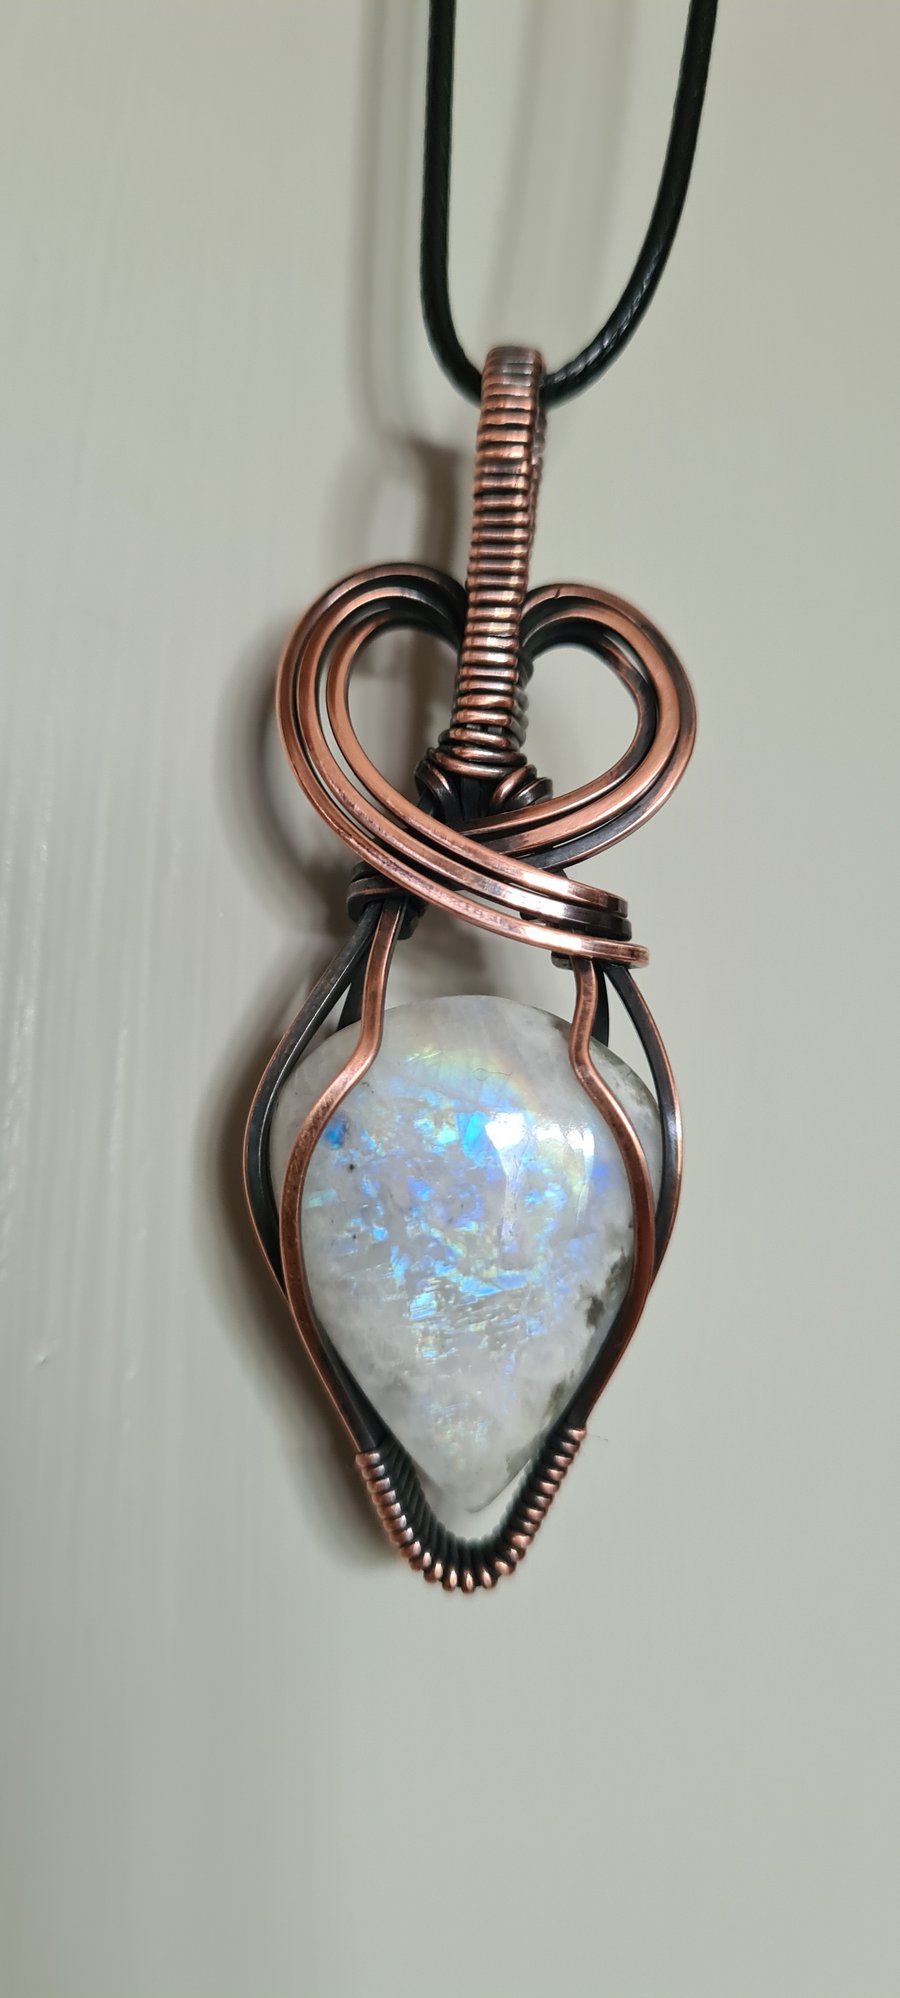 Handmade Natural Rainbow Moonstone & Copper Necklace Pendant Gift Boxed Crystal